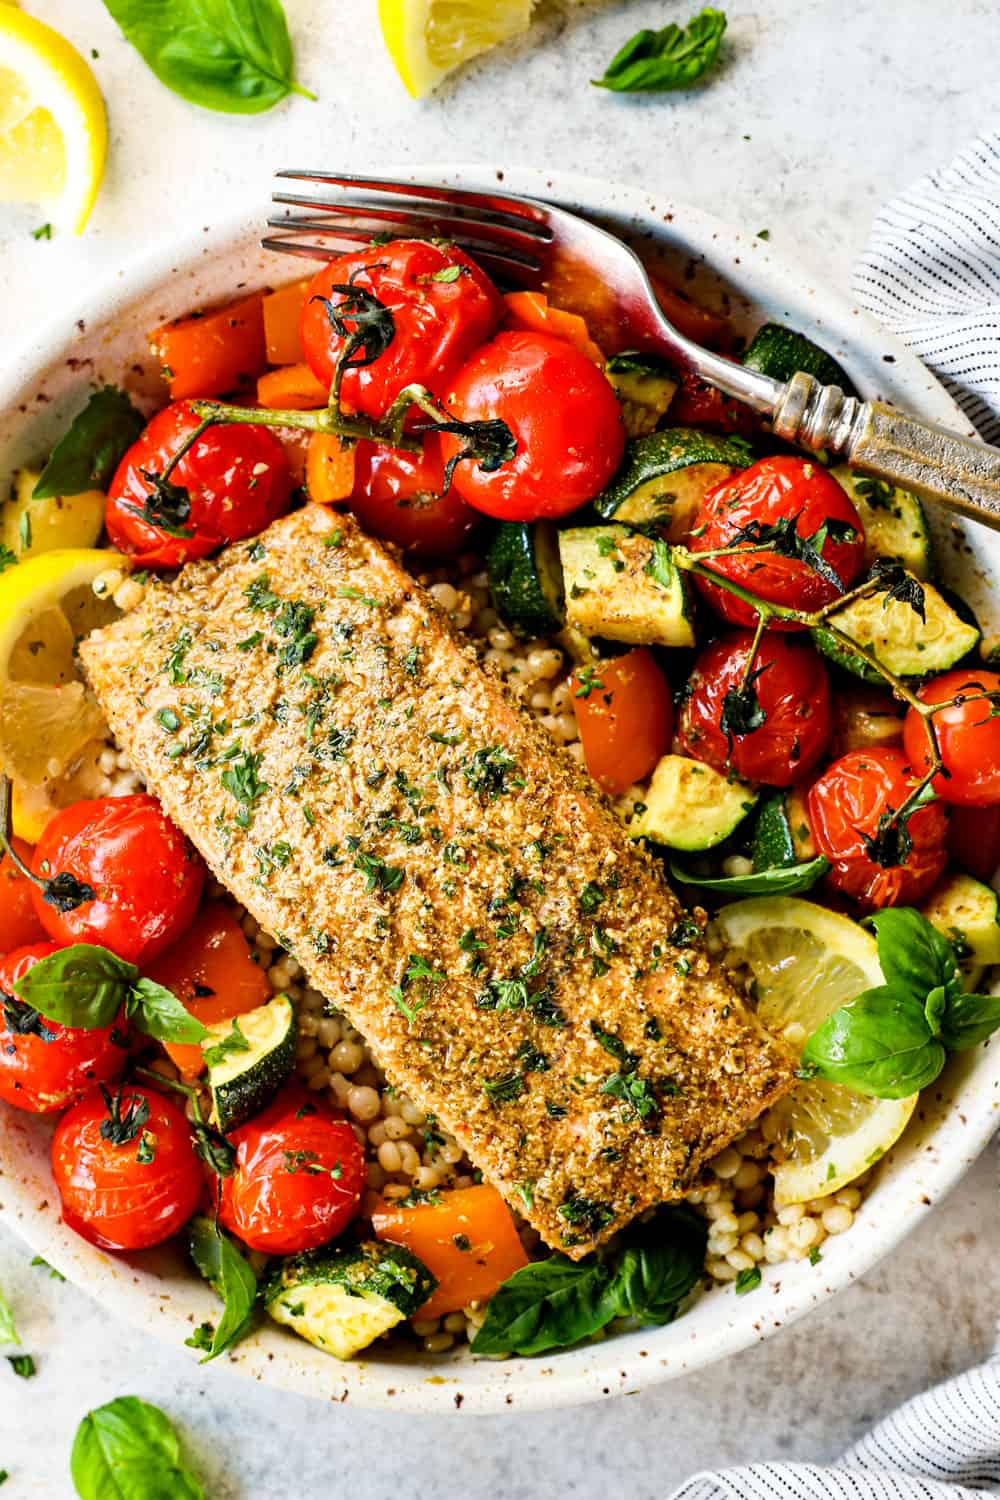 showing how to serve bakes salmon pesto by adding salmon fillets to a blow with rice, tomatoes, zucchini and bell peppers